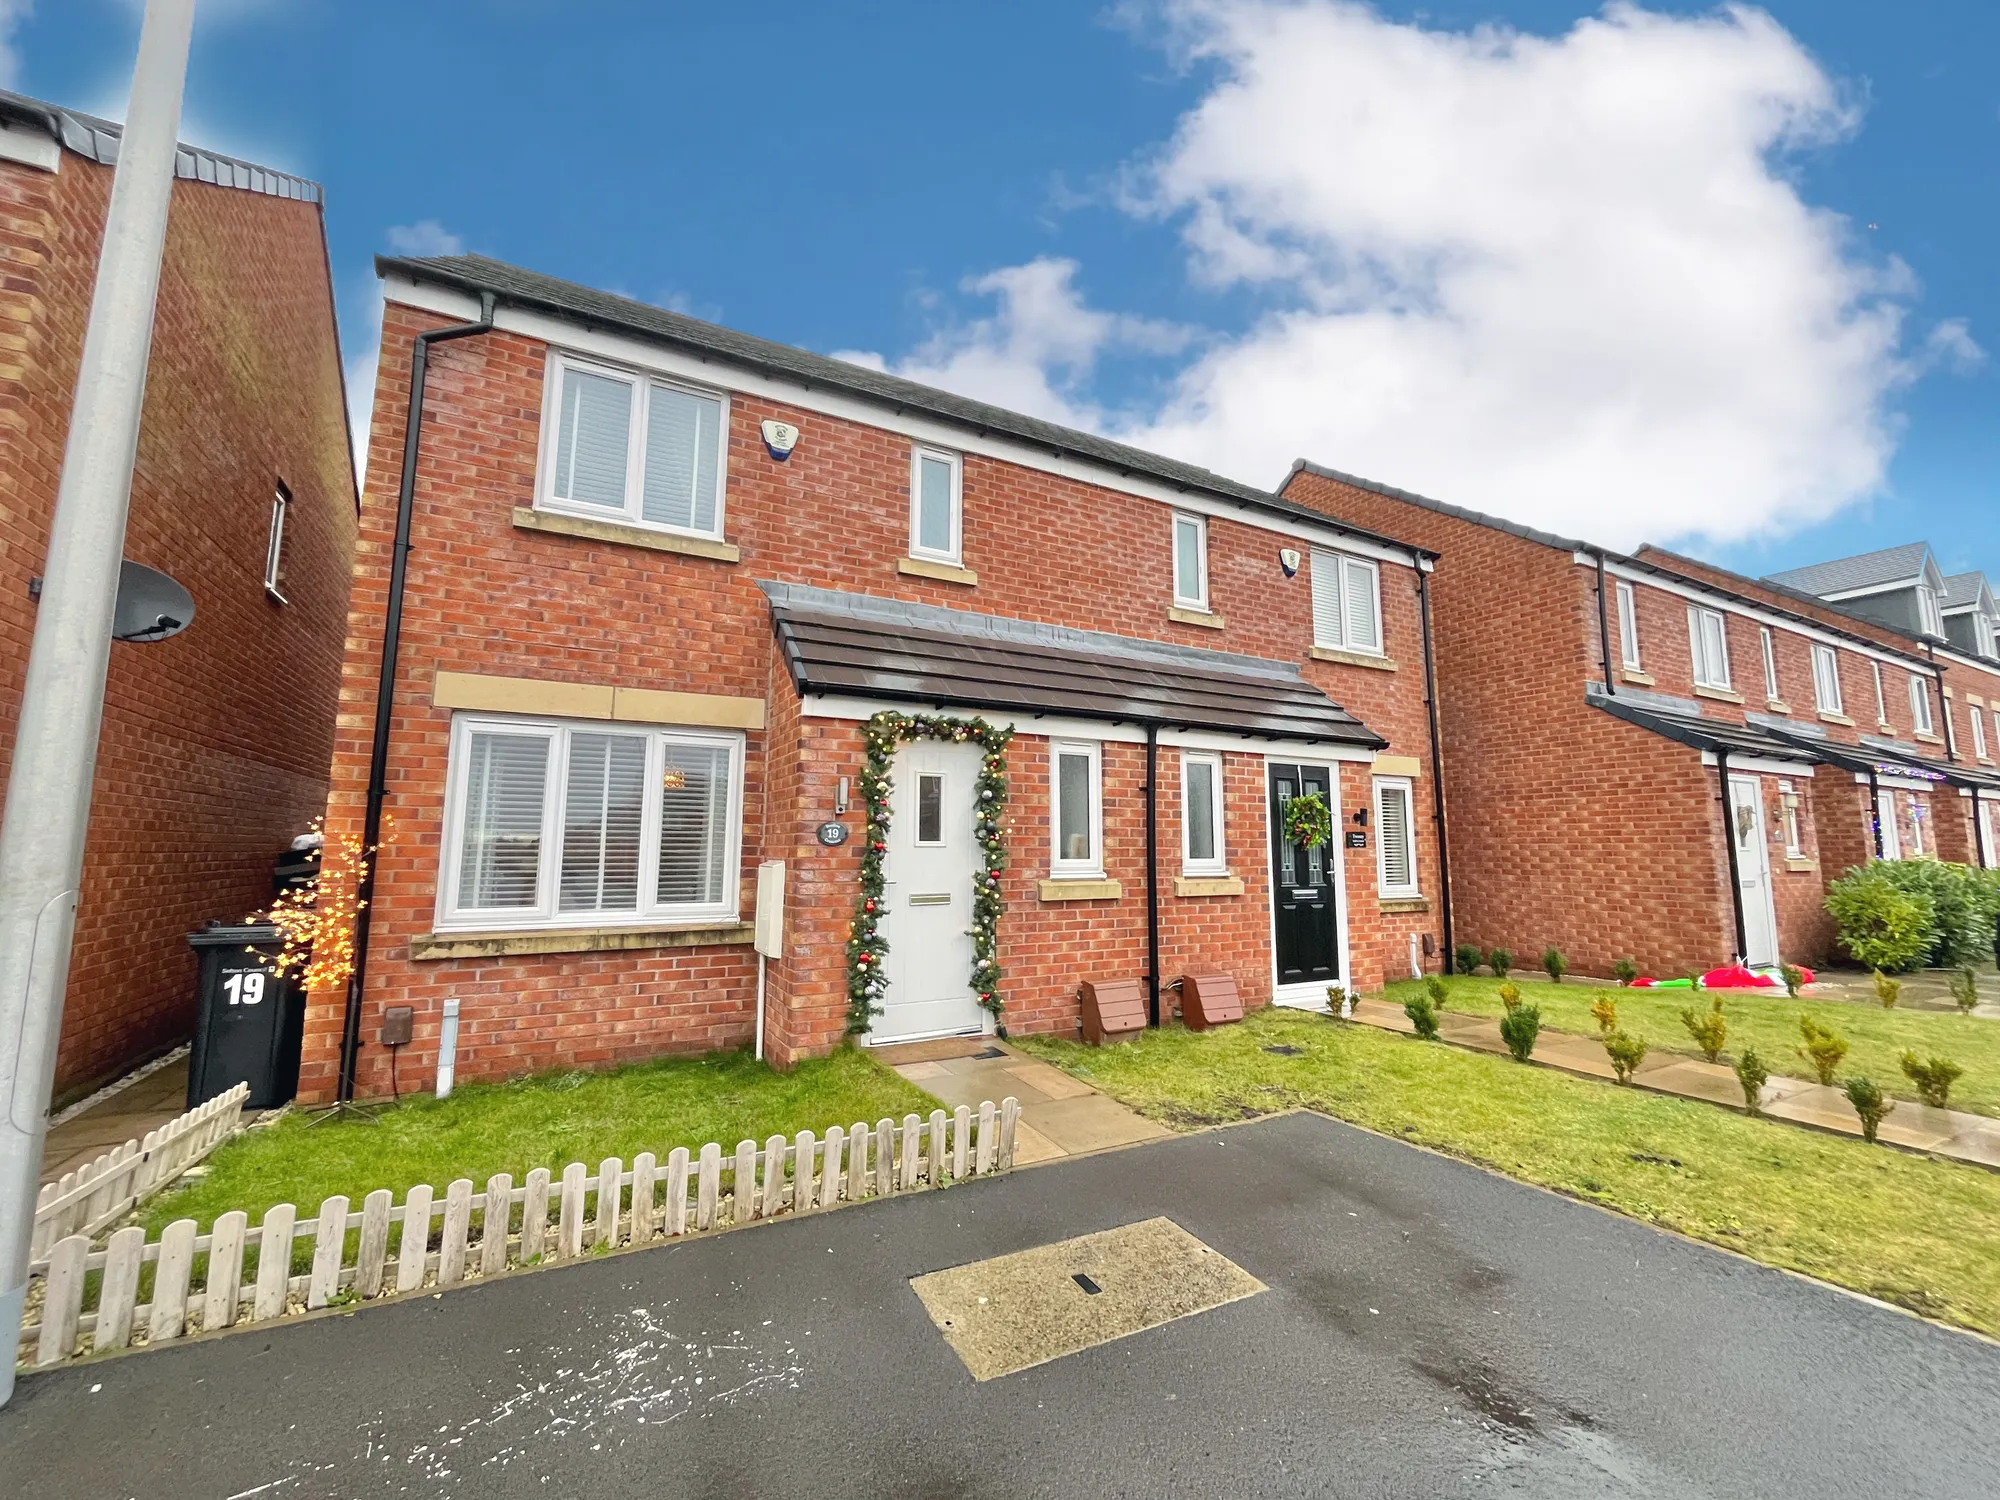 3 bed semi-detached house for sale in Swallow Crescent, Liverpool - Property Image 1